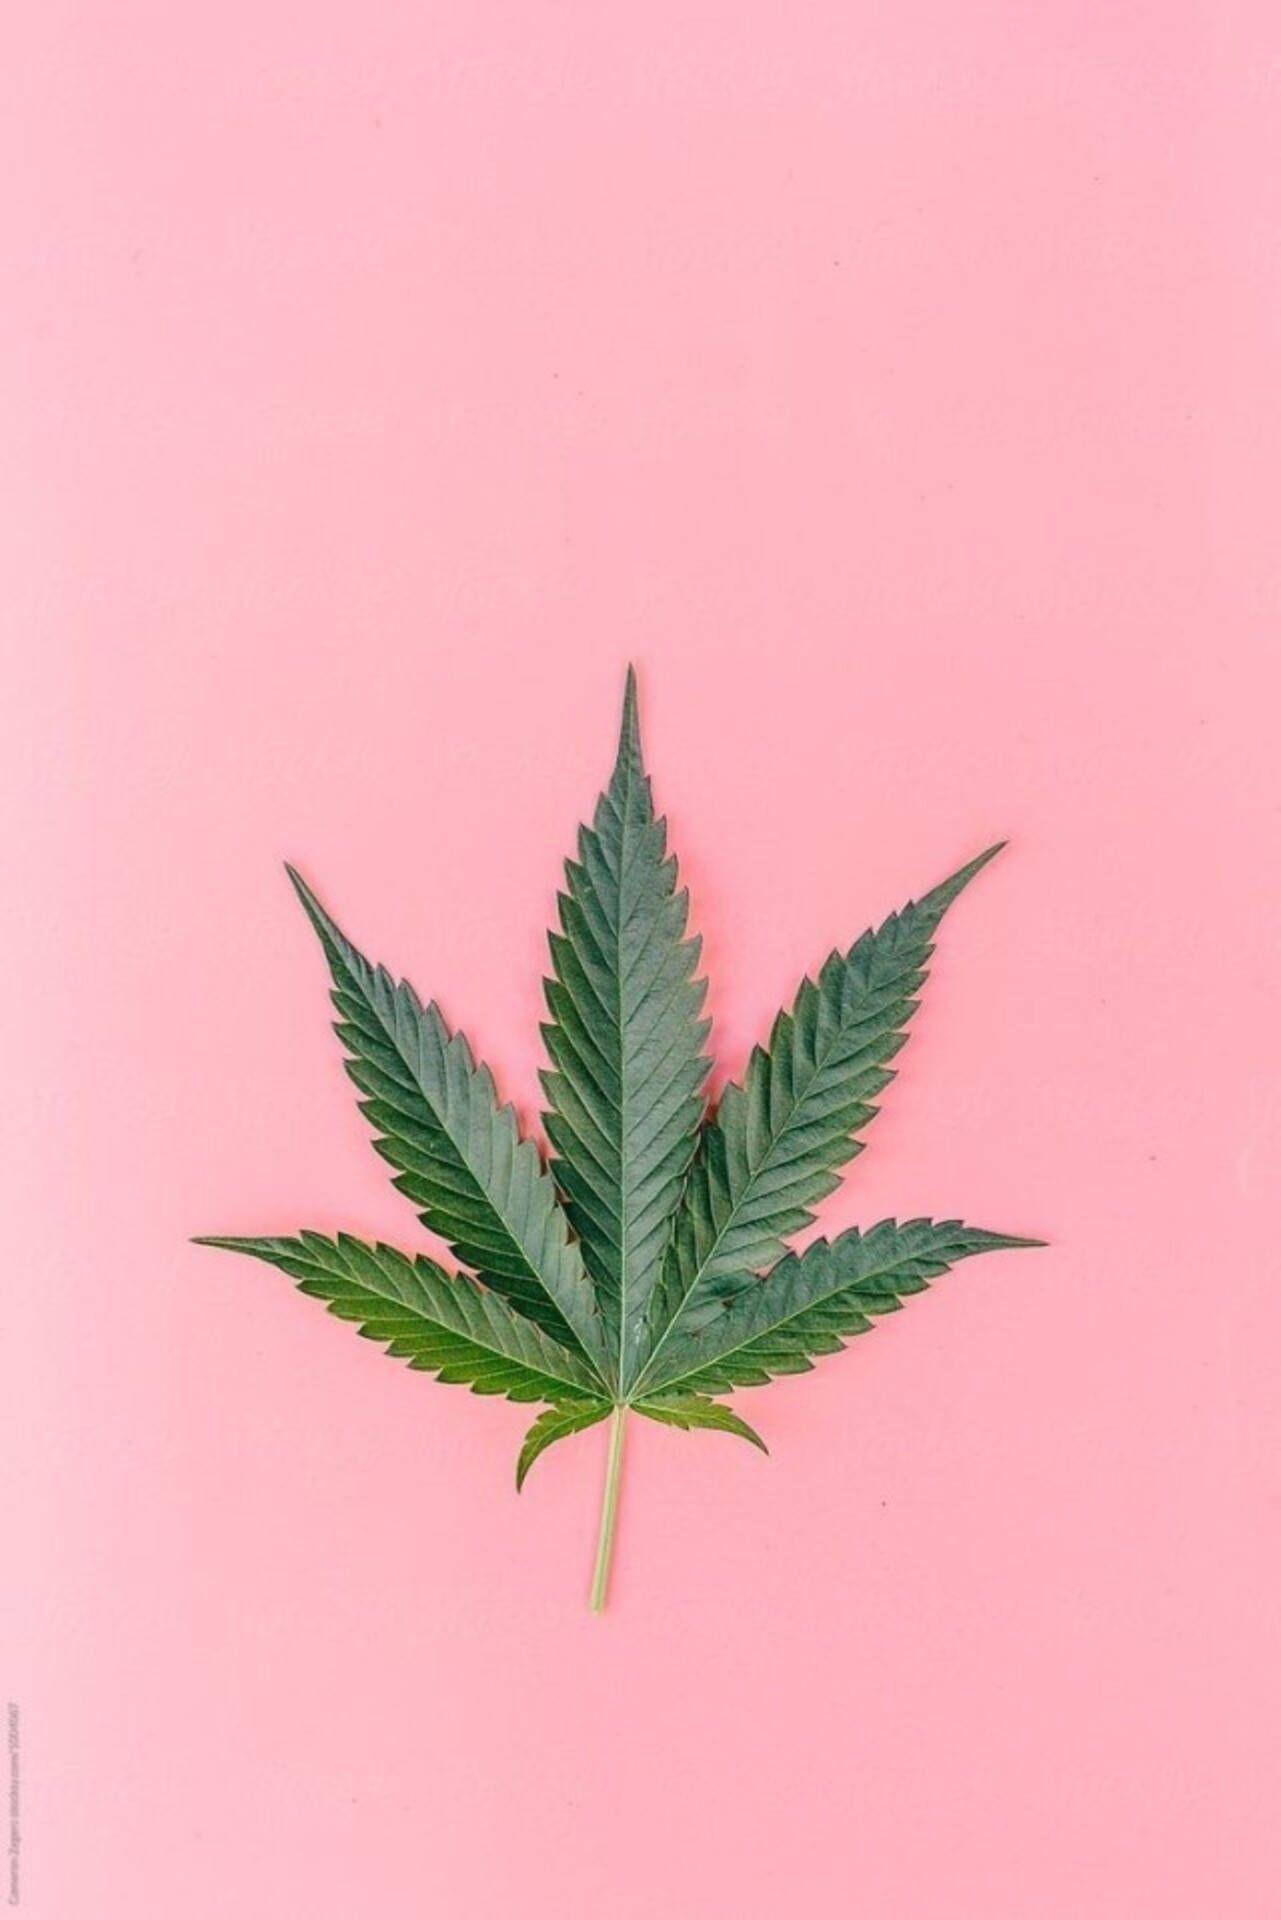 A single cannabis leaf on pink background - Weed